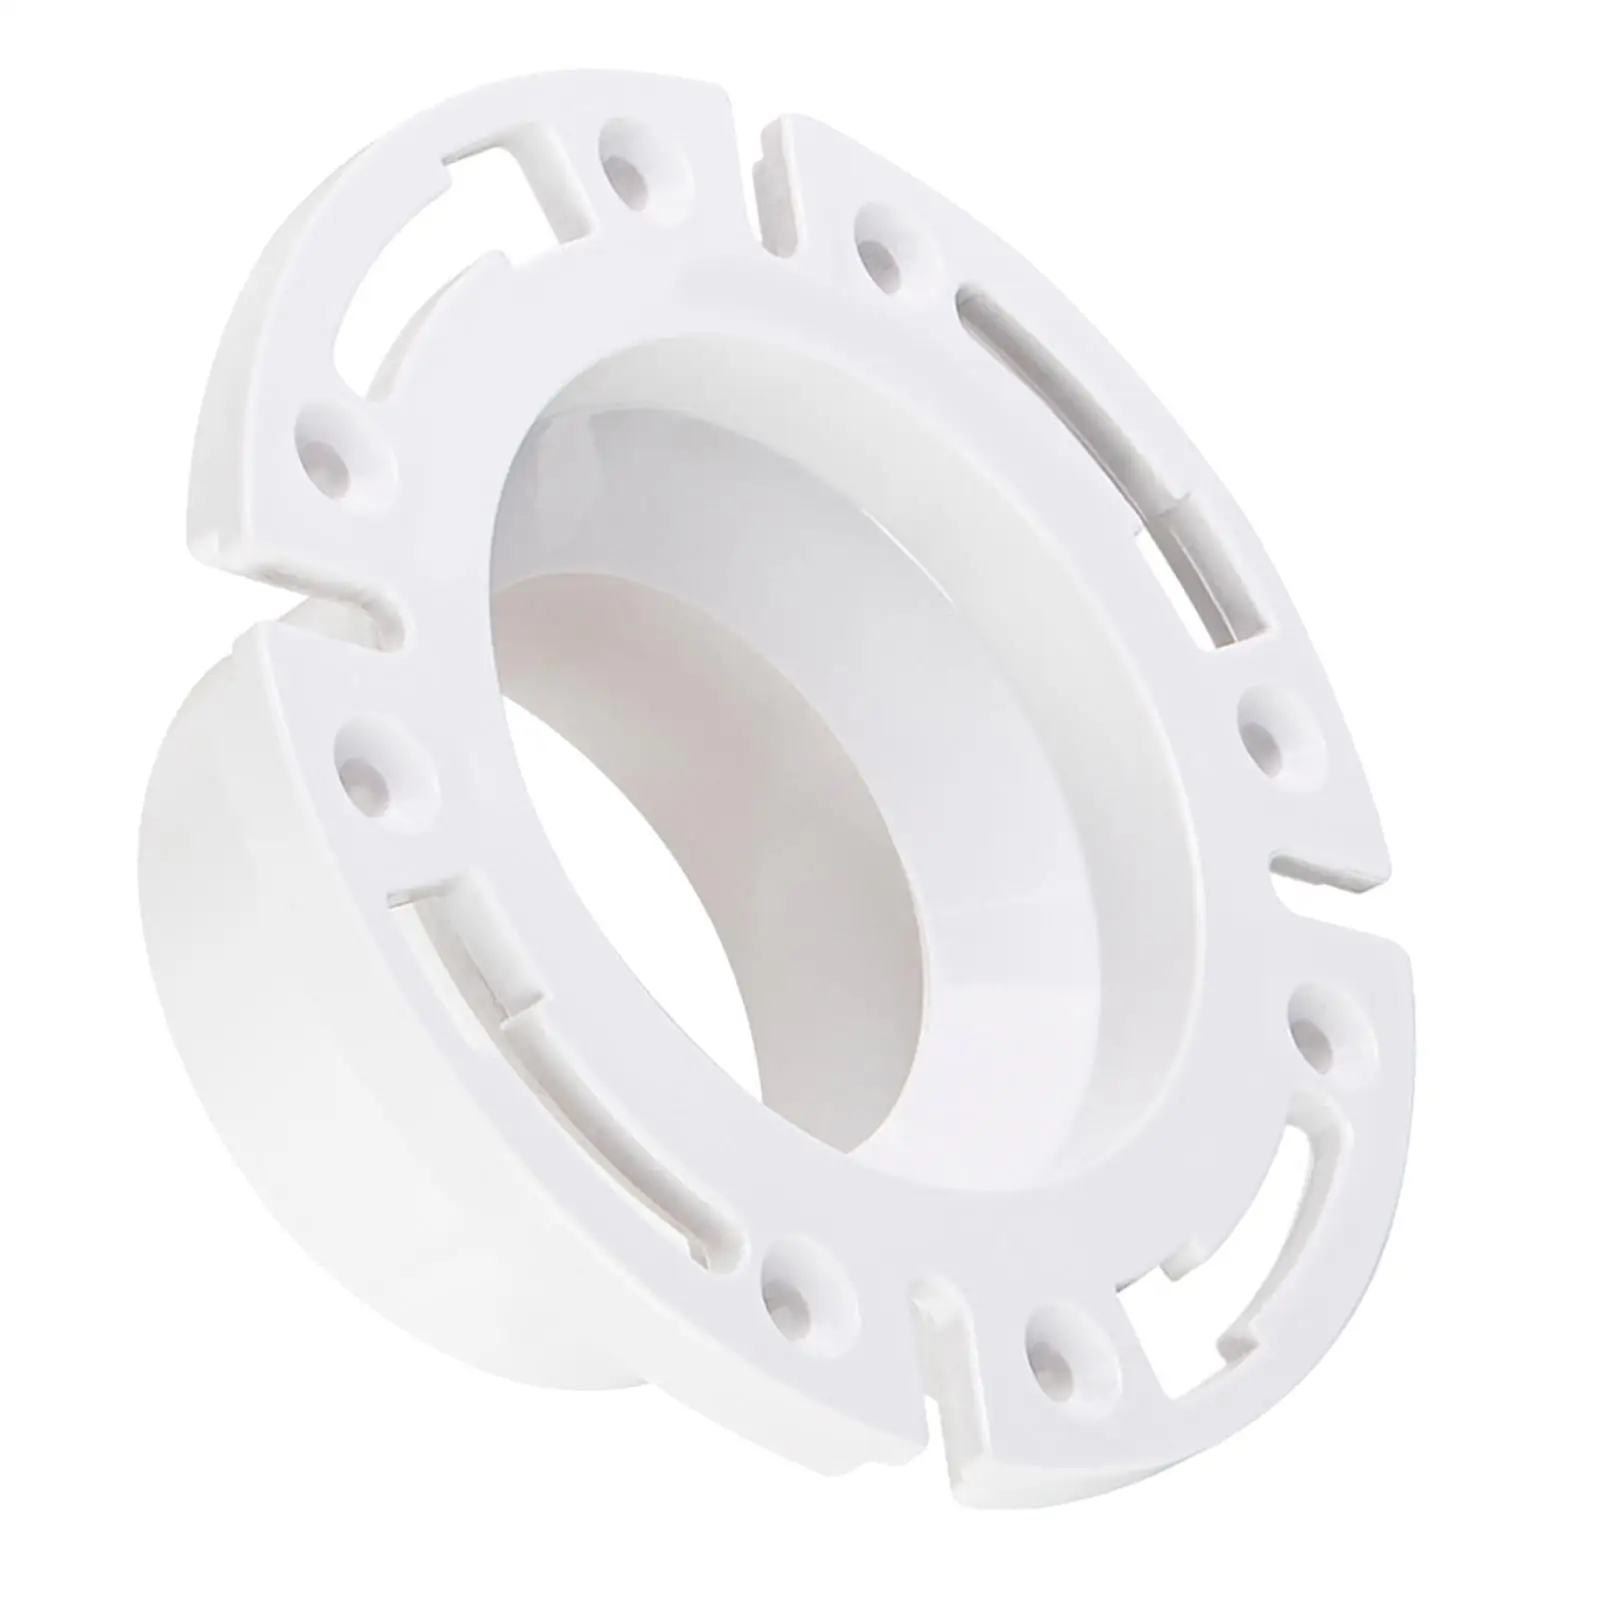 Toilet INSTALL Flange Lightweight Accessories Easy to Install Premium Spare